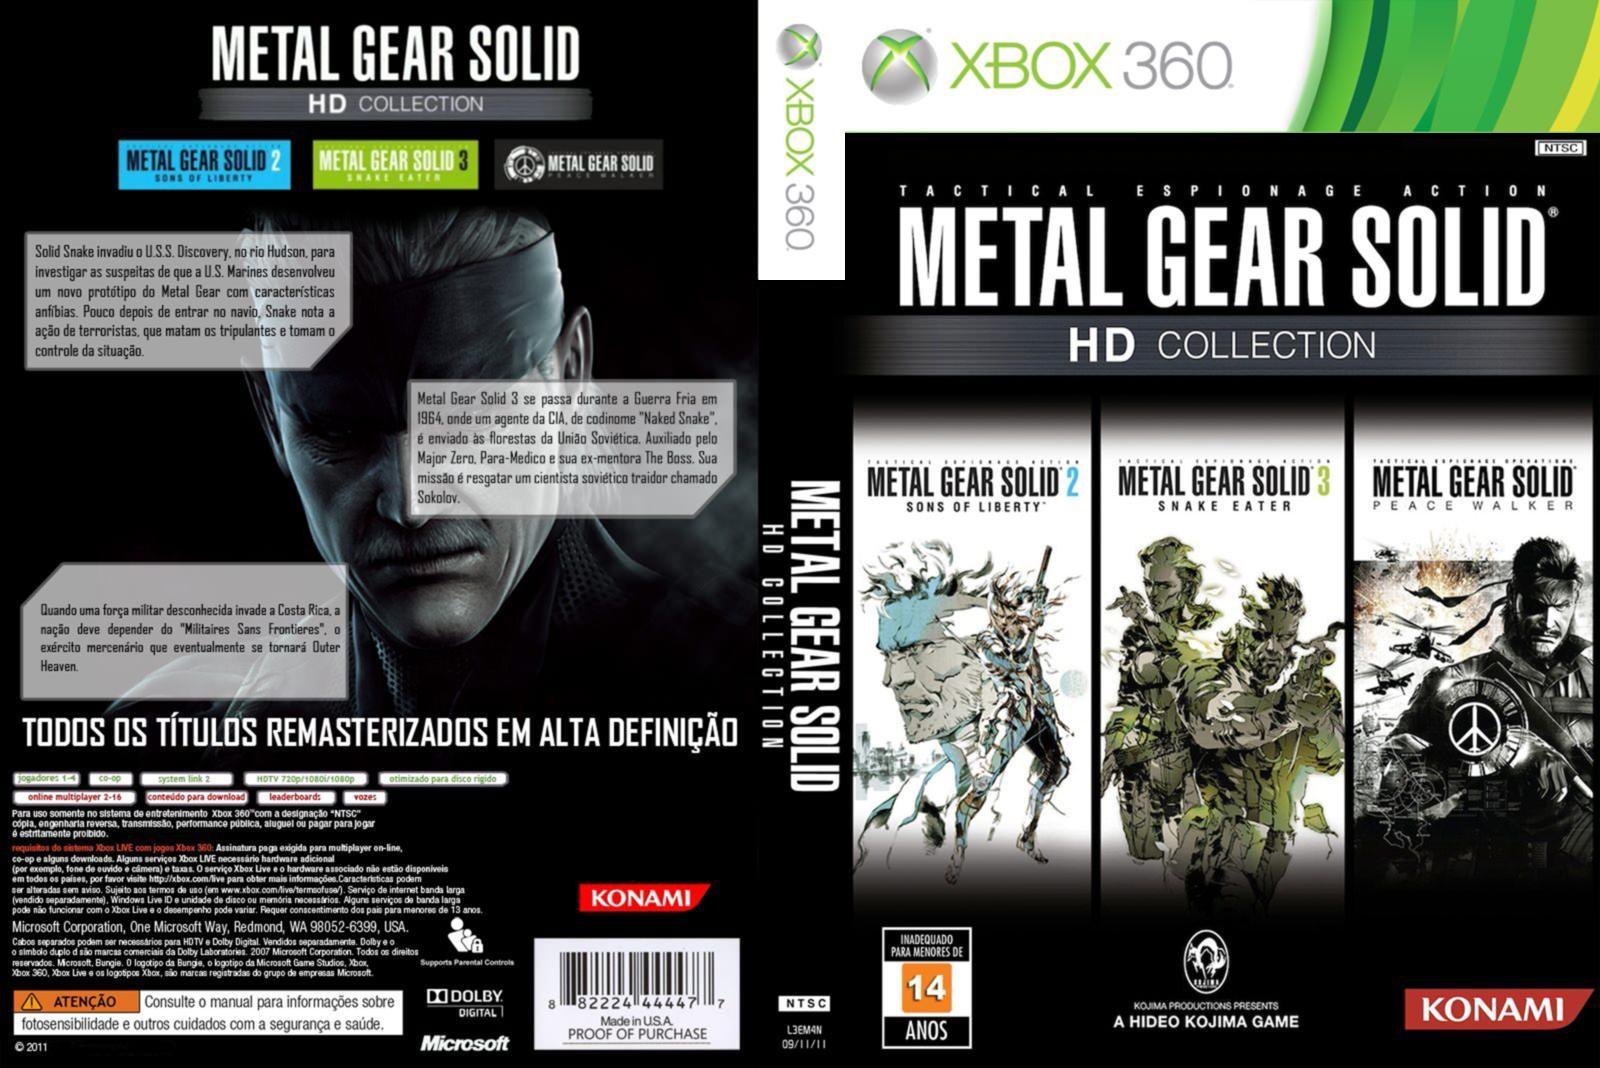 Mgs 3 master collection. Metal Gear Solid 3 Xbox 360. Metal Gear 2 Xbox 360. Metal Gear Solid 1 Xbox 360.